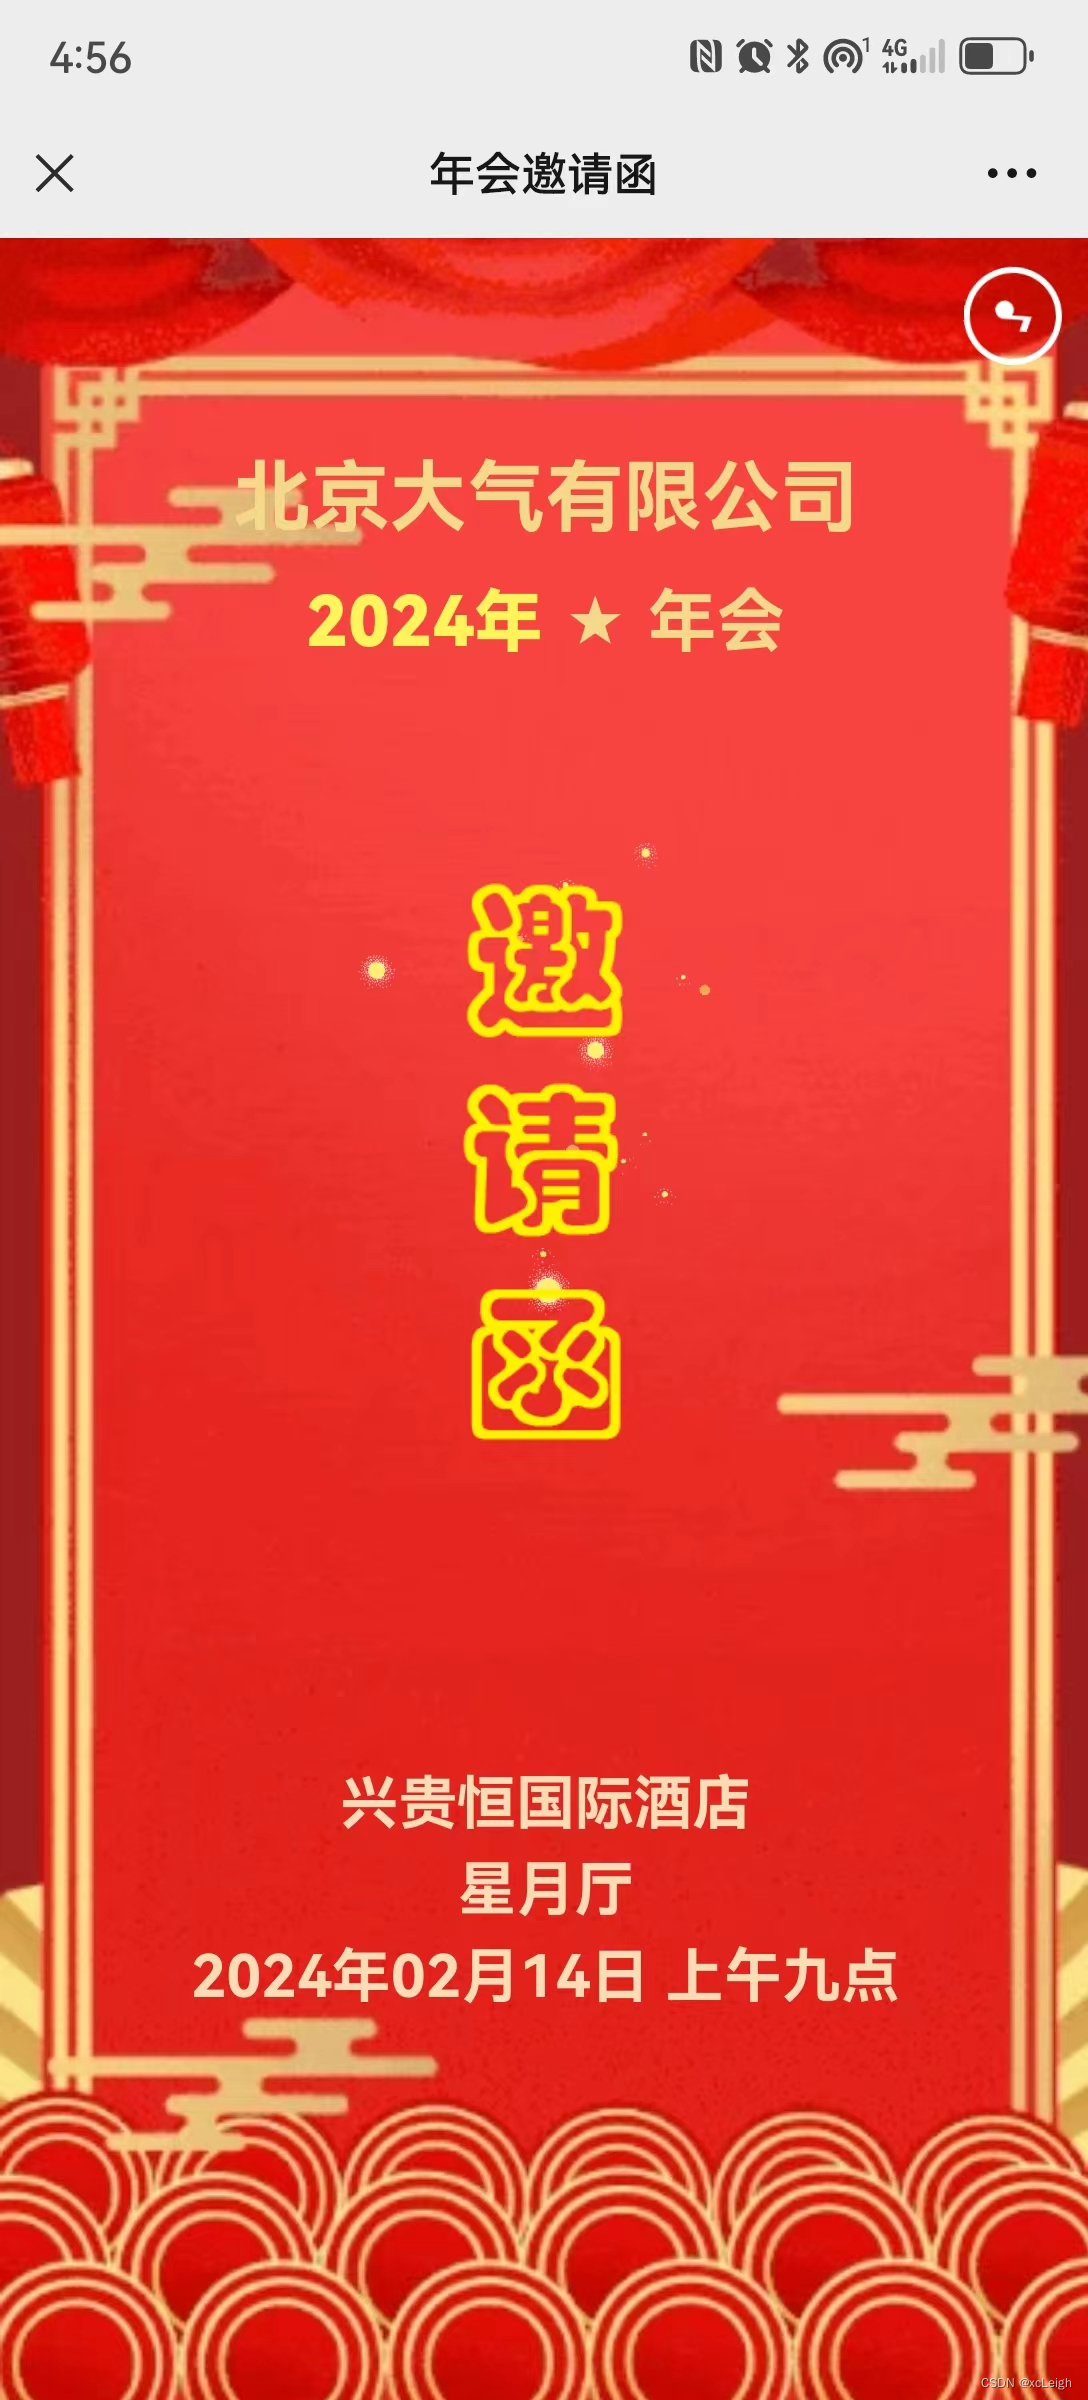 <span style='color:red;'>html</span><span style='color:red;'>5</span>实现好看的年会邀请函<span style='color:red;'>源</span><span style='color:red;'>码</span><span style='color:red;'>模板</span>